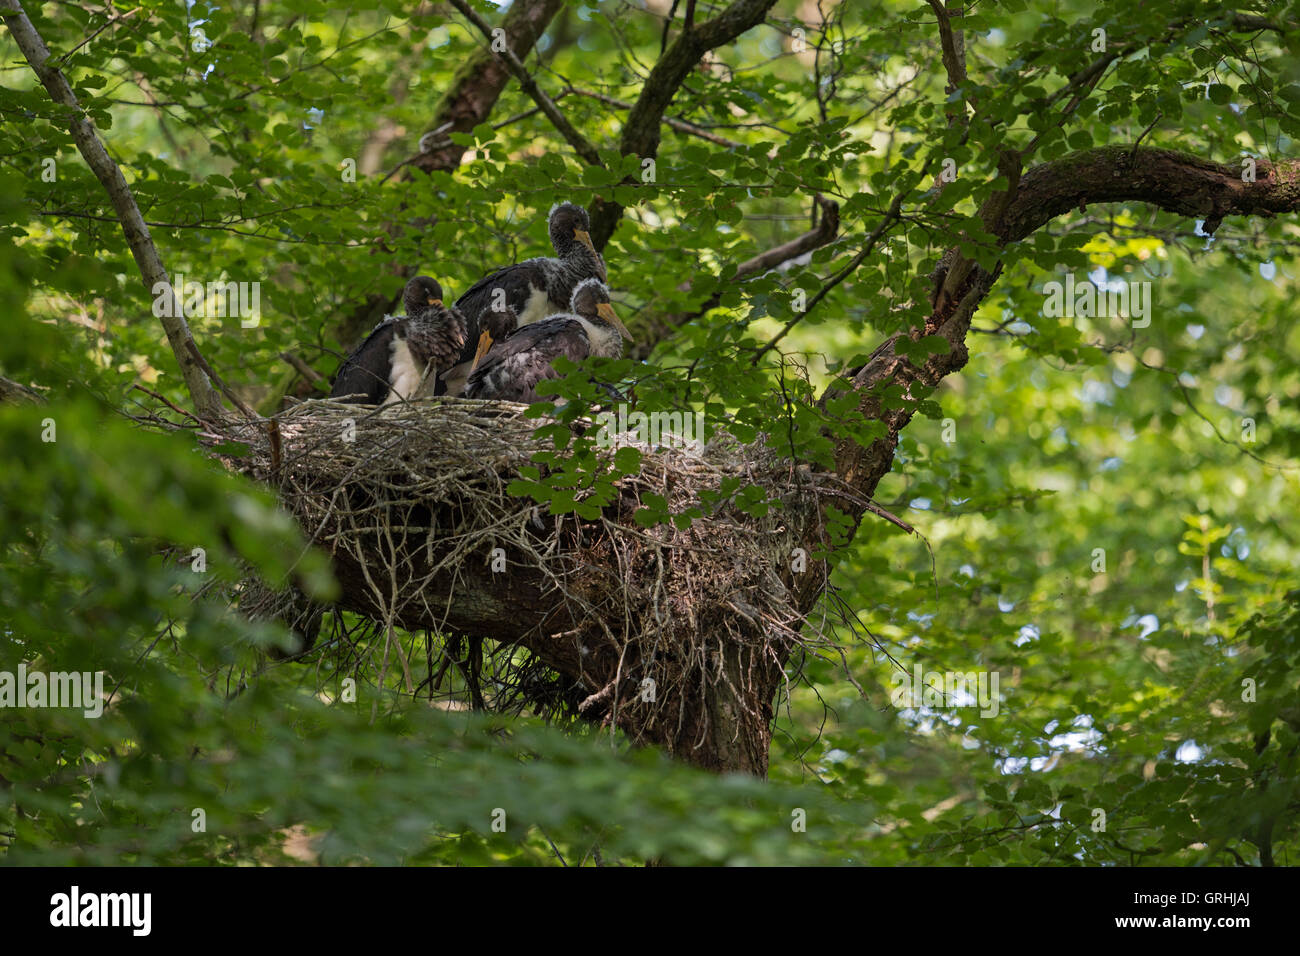 Black Storks / Schwarzstoerche ( Ciconia nigra ), relaxed offspring in nest, nesting high up in an old beech tree, sleeping. Stock Photo